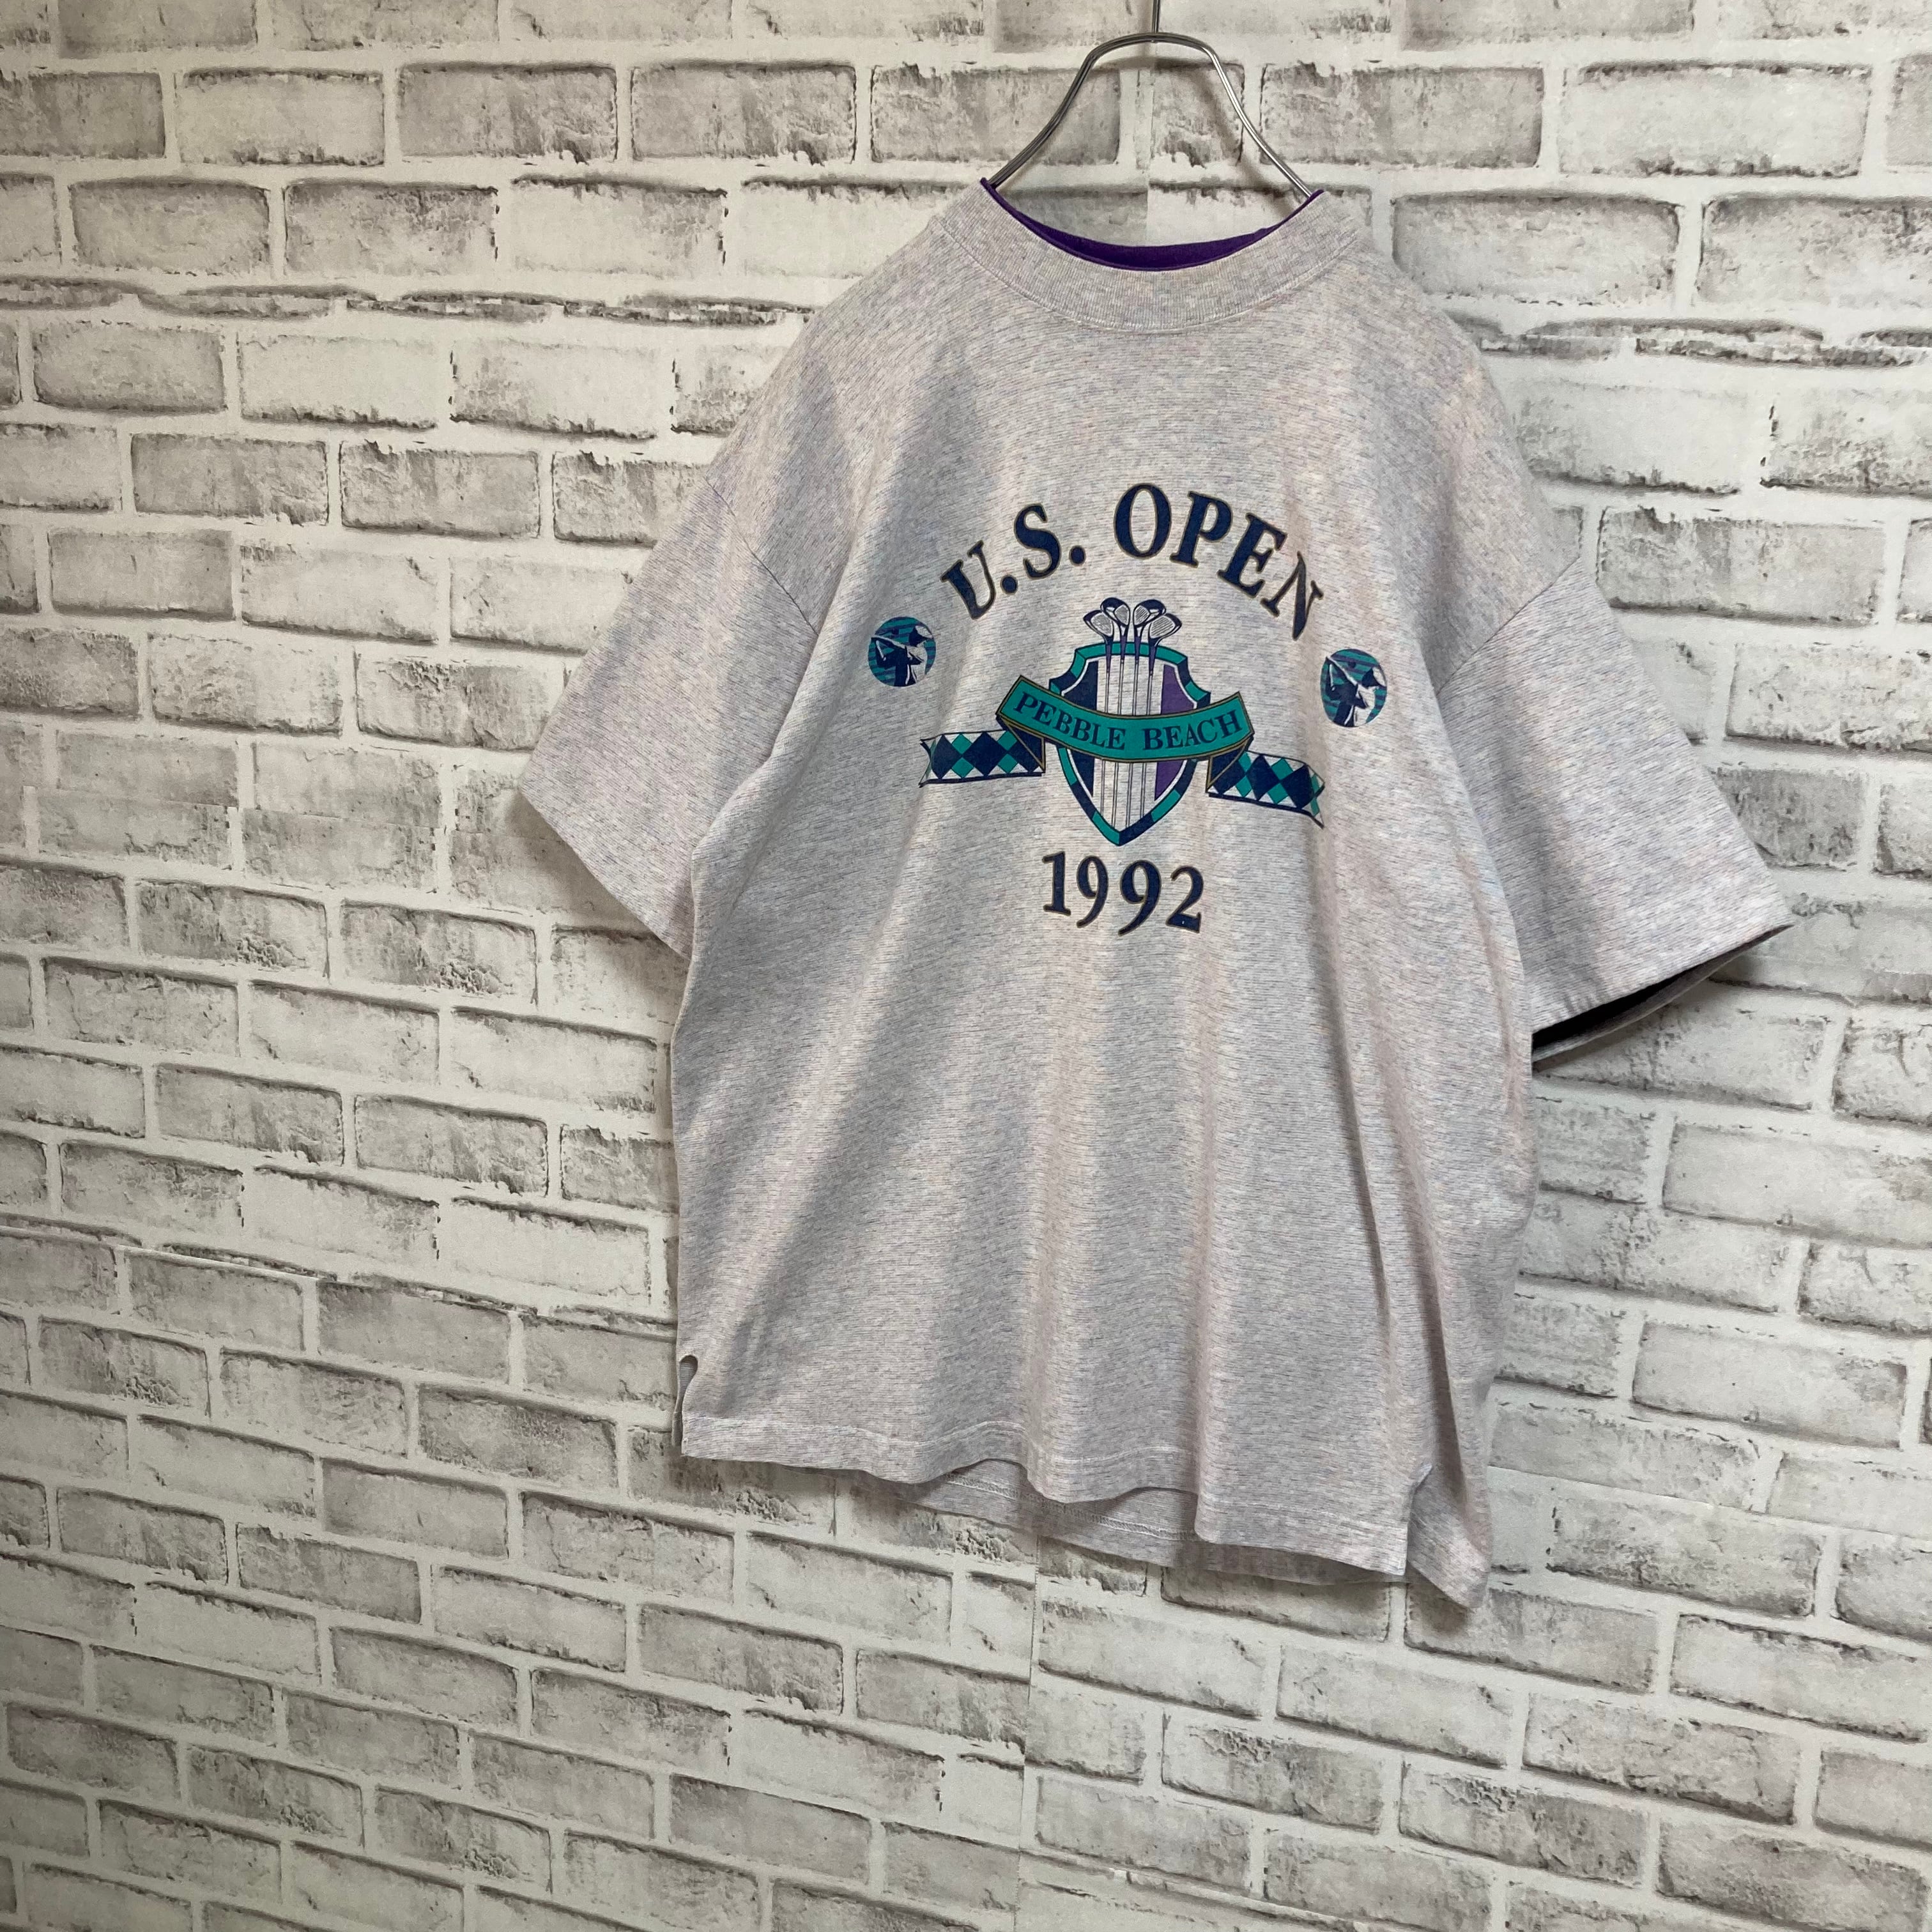 GEAR FOR SPORTSS/S Tee L Made in USA s vintage “U.S.OPEN